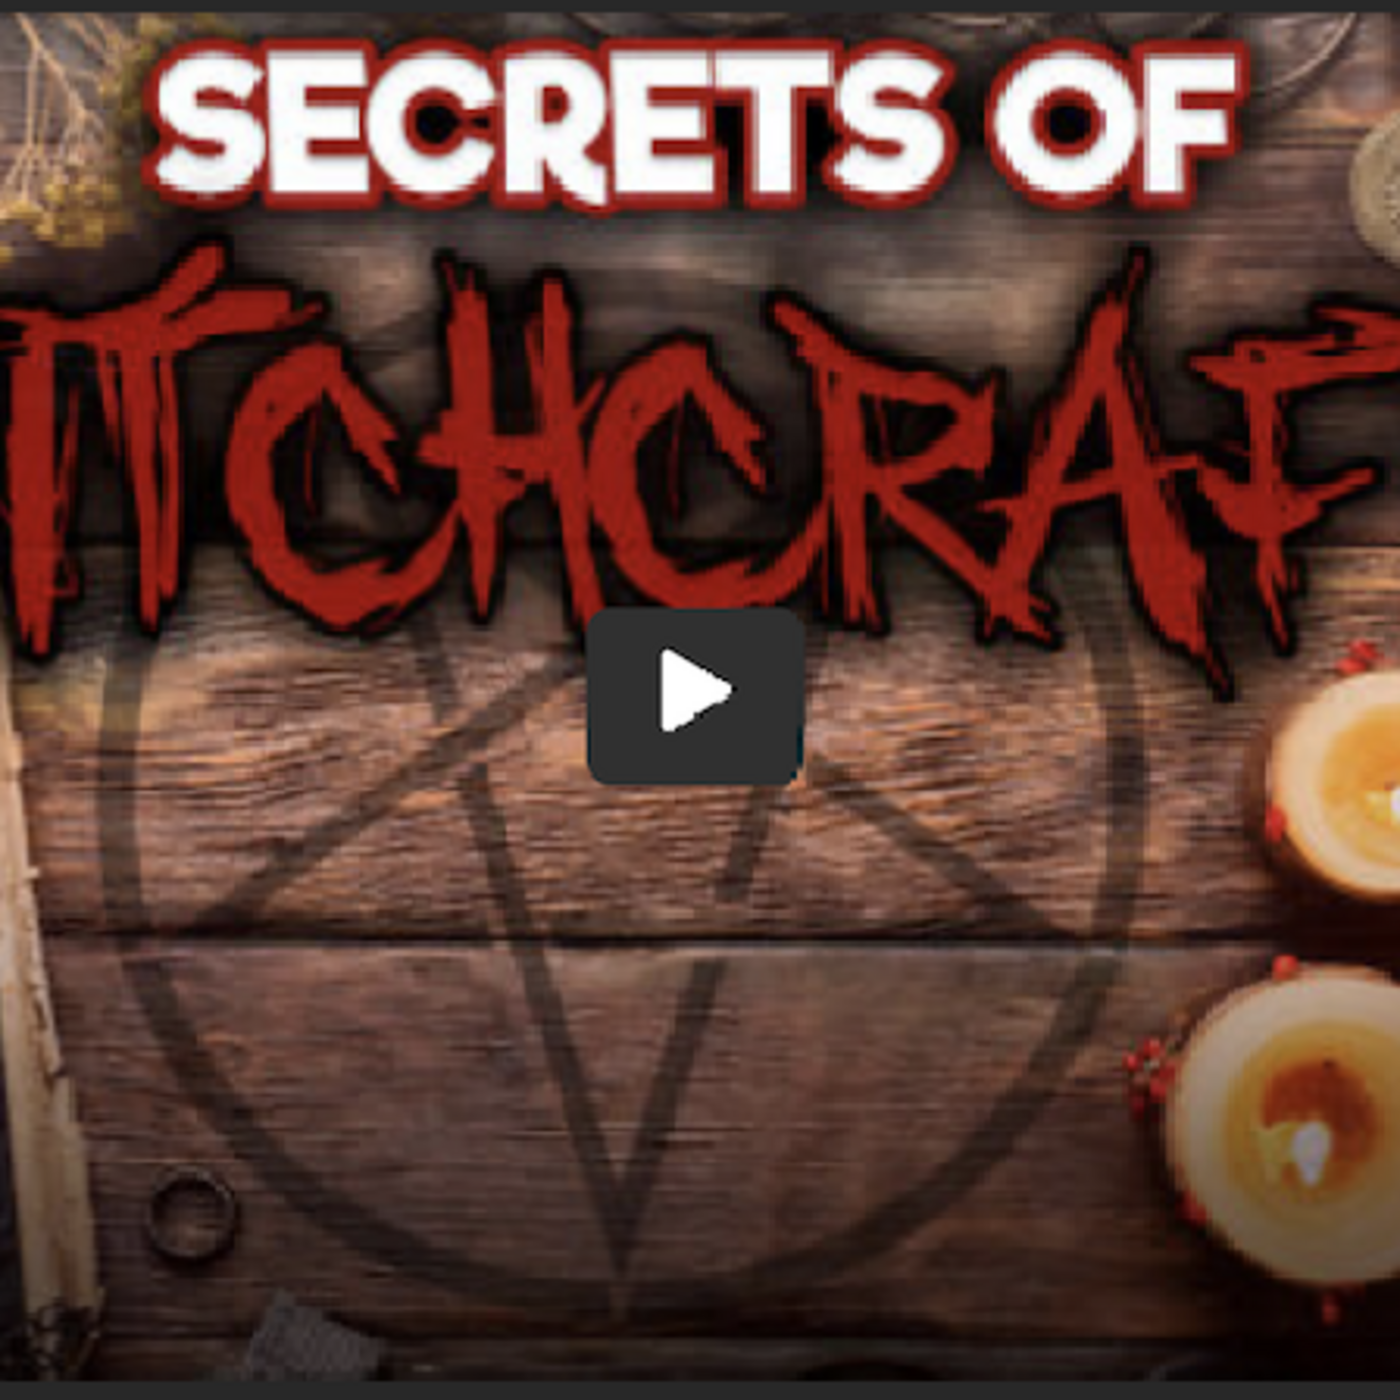 Secrets of Witchcraft They Don't Want You To Know